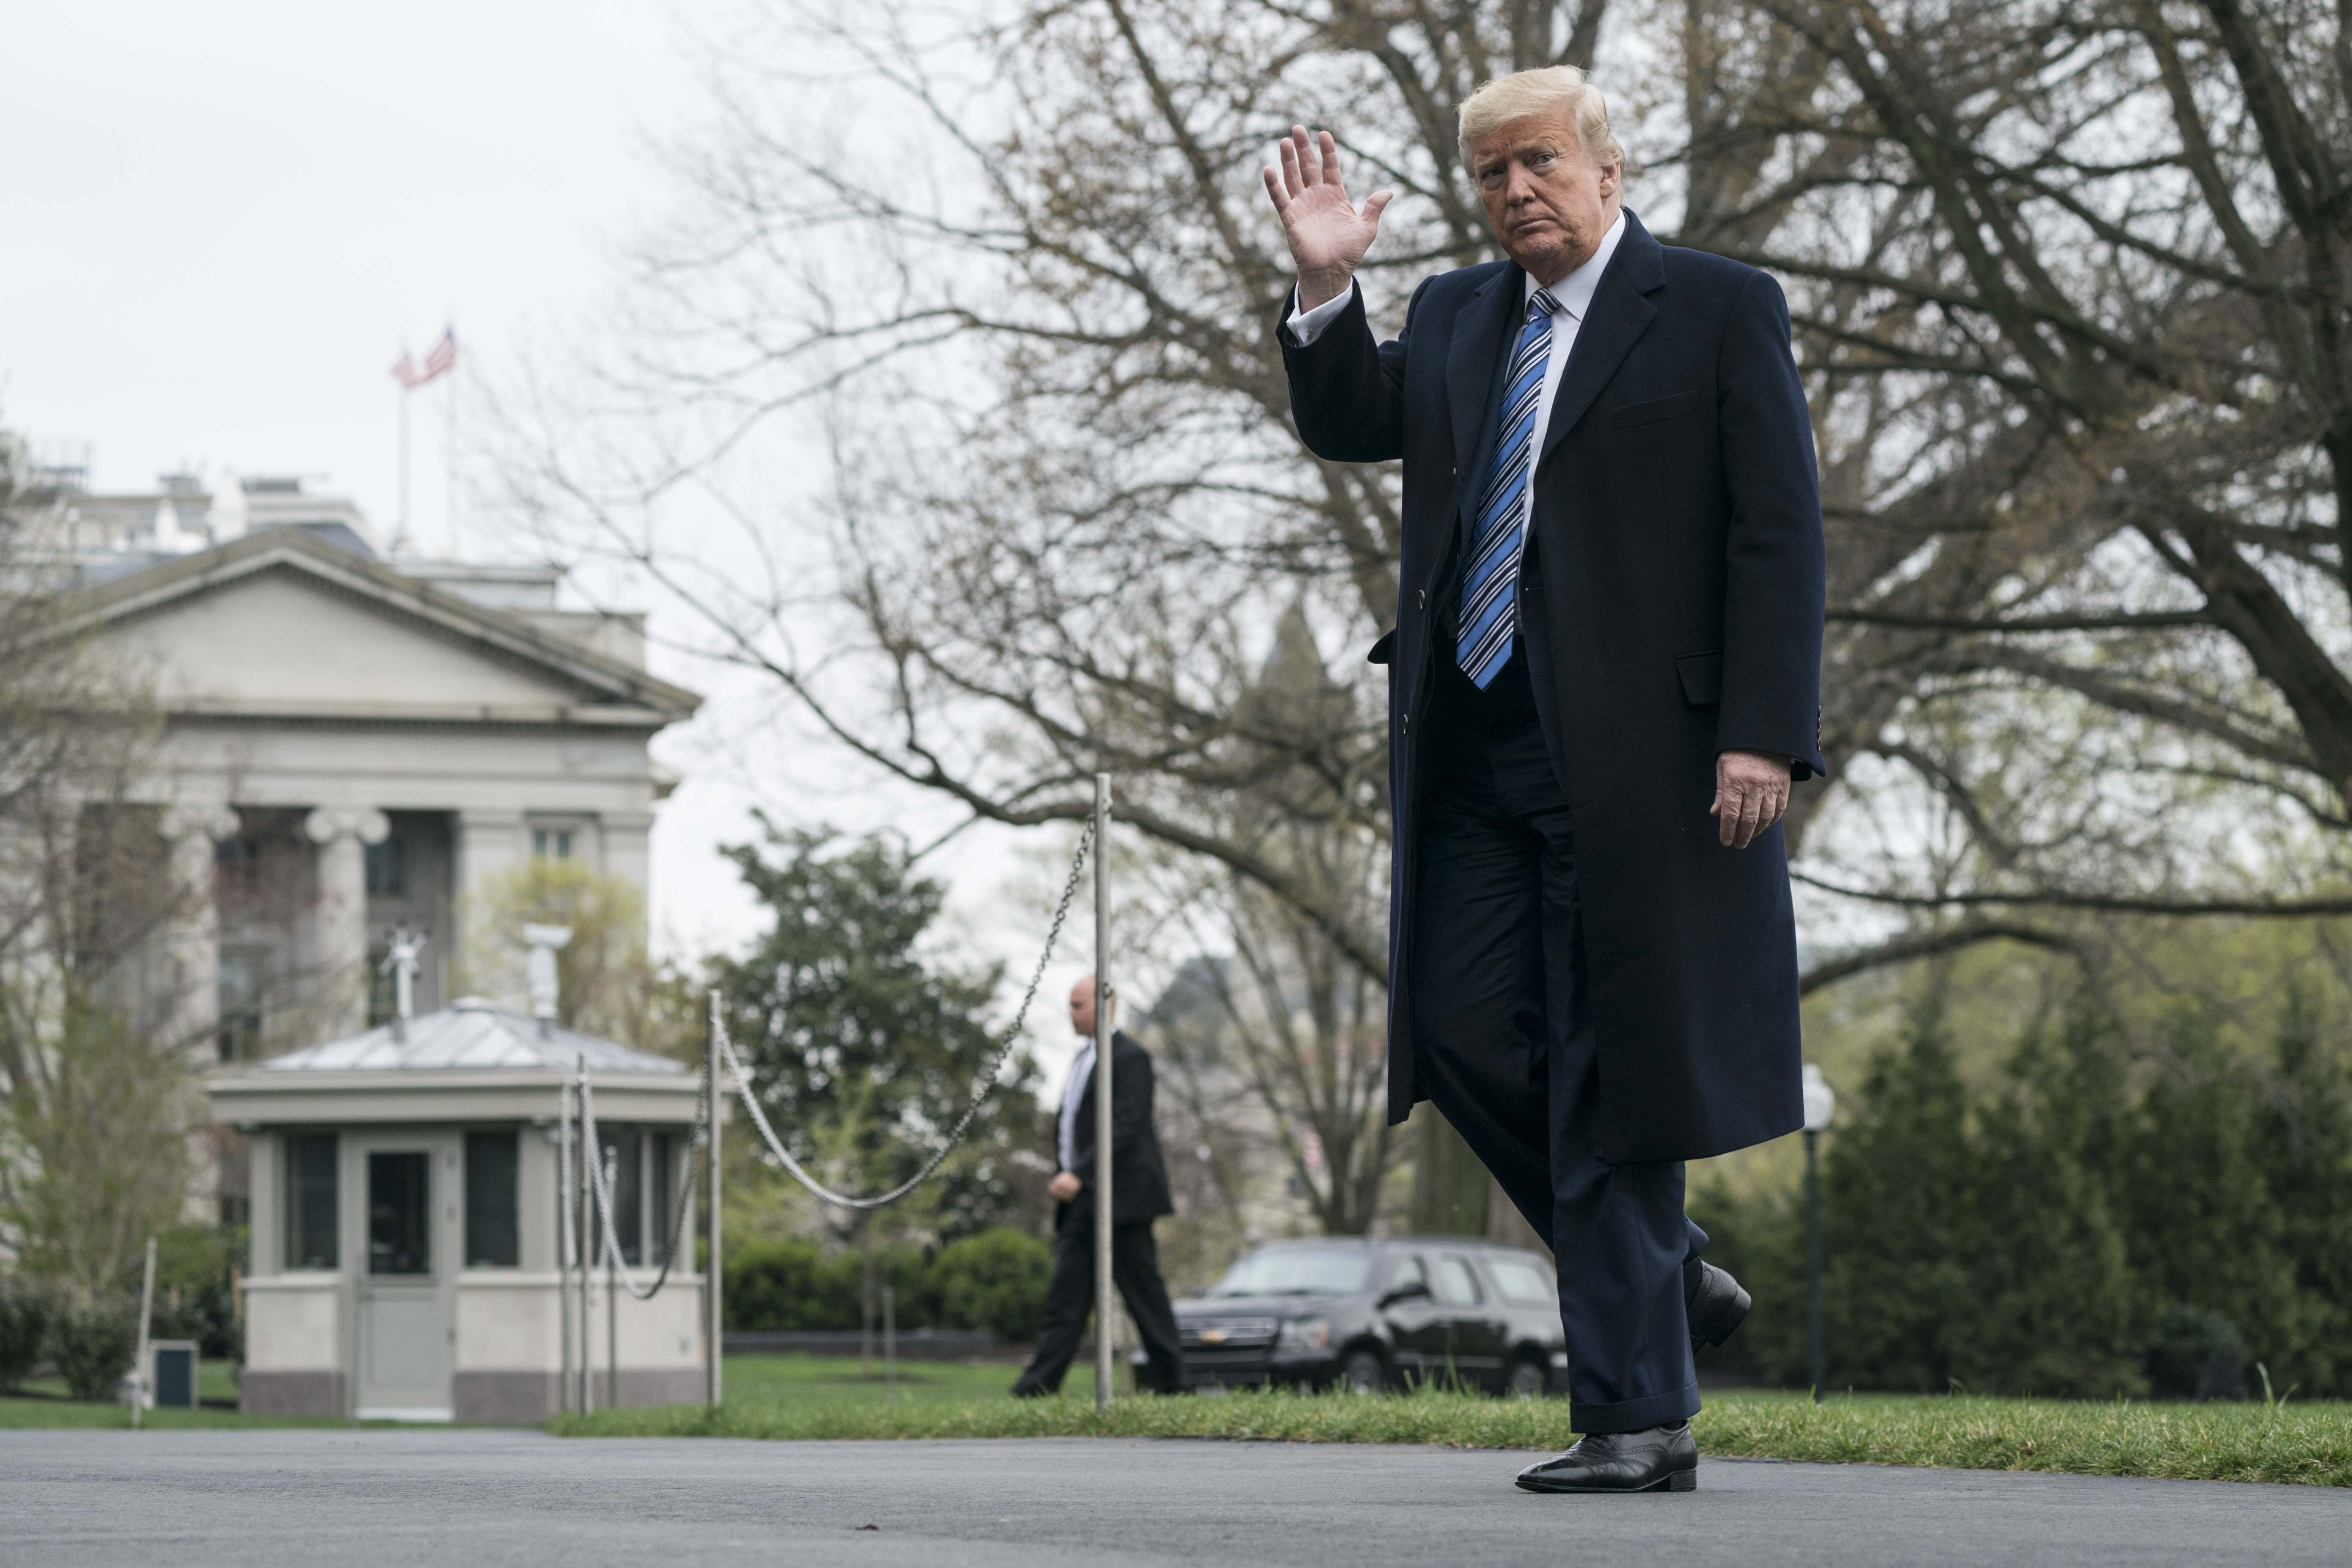 WASHINGTON, DC - MARCH 28: U.S. President Donald Trump arrives back to the White House on March 28, 2020 in Washington, DC. President Trump traveled to Norfolk, Virginia to attend a departure ceremony for the U.S. Navy hospital ship USNS Comfort, which is sailing to New York City to aid in the coronavirus outbreak. (Photo by Sarah Silbiger/Getty Images)